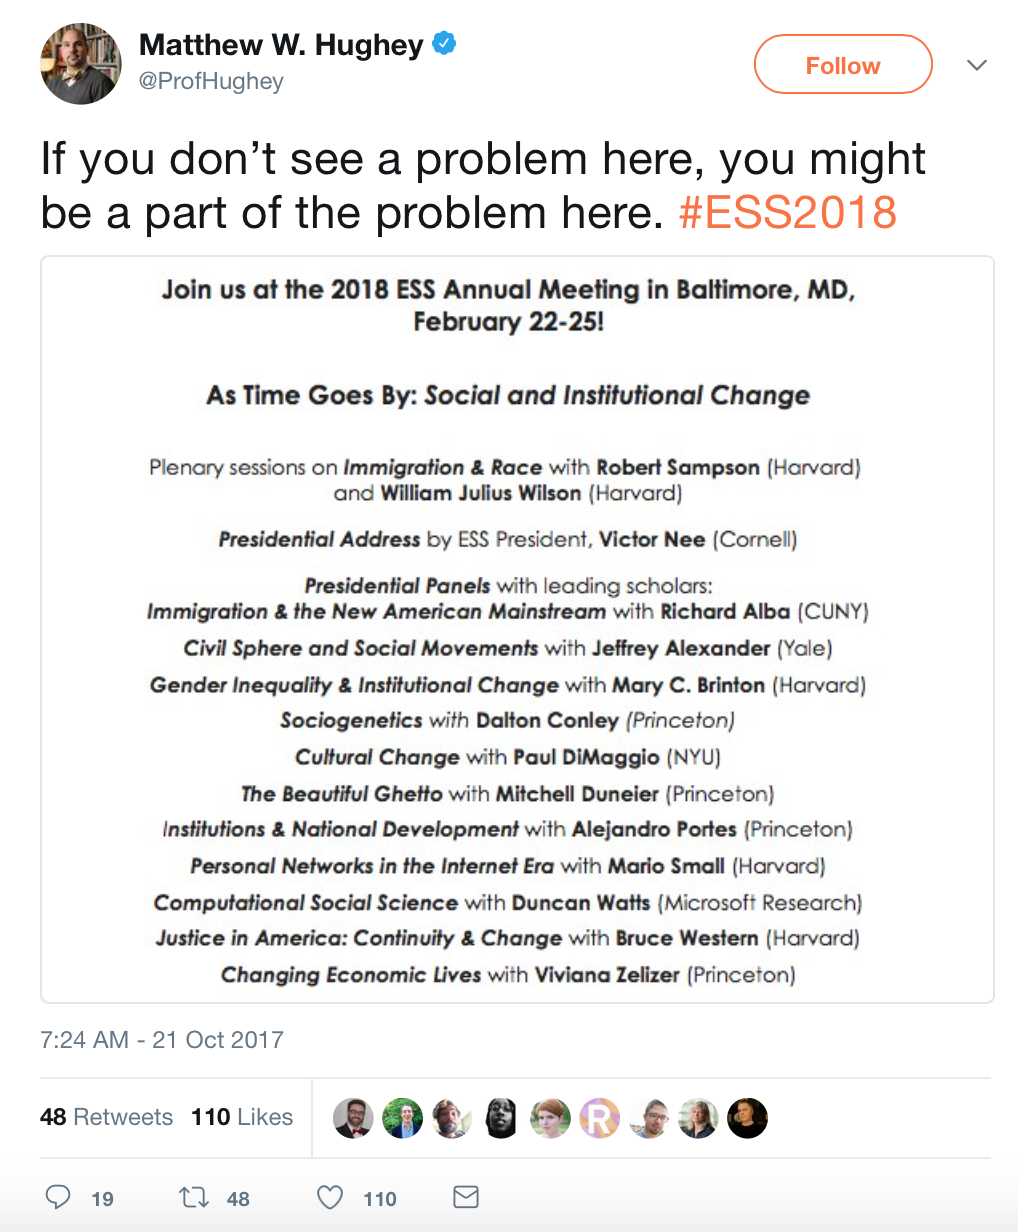 Tweet from Matthew W. Hughey (@profhughey) says, "If you don't see a problem here, you might be a part of the problem here. #ESS2018" Includes image of invitation to Eastern Sociological Society meeting: "Join us at the 2018 ESS Annual Meeting in Baltimore, MD, February 22-25! As Time Goes By: Social and Institutional Change. Plenary sessions on Immigration & Race with Robert Sampson (Harvard) and William Julius Wilson (Harvard). Presidential address by ESS President Victor Nee (Cornell). Presidential panels with leading scholars: Immigration and the New American Mainstream with Richard Alba (CUNY), Civil Sphere and Social Movements with Jeffrey Alexander (Yale), Gender Inequality and Institutional Change with Mary C. Brinton (Harvard), Sociogenetics with Dalton Conley (Princeton), Cultural Change with Paul DiMaggio (NYU), The Beautiful Ghetto with Mitchell Duneier (Princeton), Institutions and National Development with Alejandro Portes (Princeton), Personal Networks in the Internet Era with Mario Small (Harvard), Computational Social Science with Duncan Watts (Microsoft Research), Justice in America: Continuity and Change with Bruce Western (Harvard), Changing Economic Lives with Viviana Zelizer (Princeton).